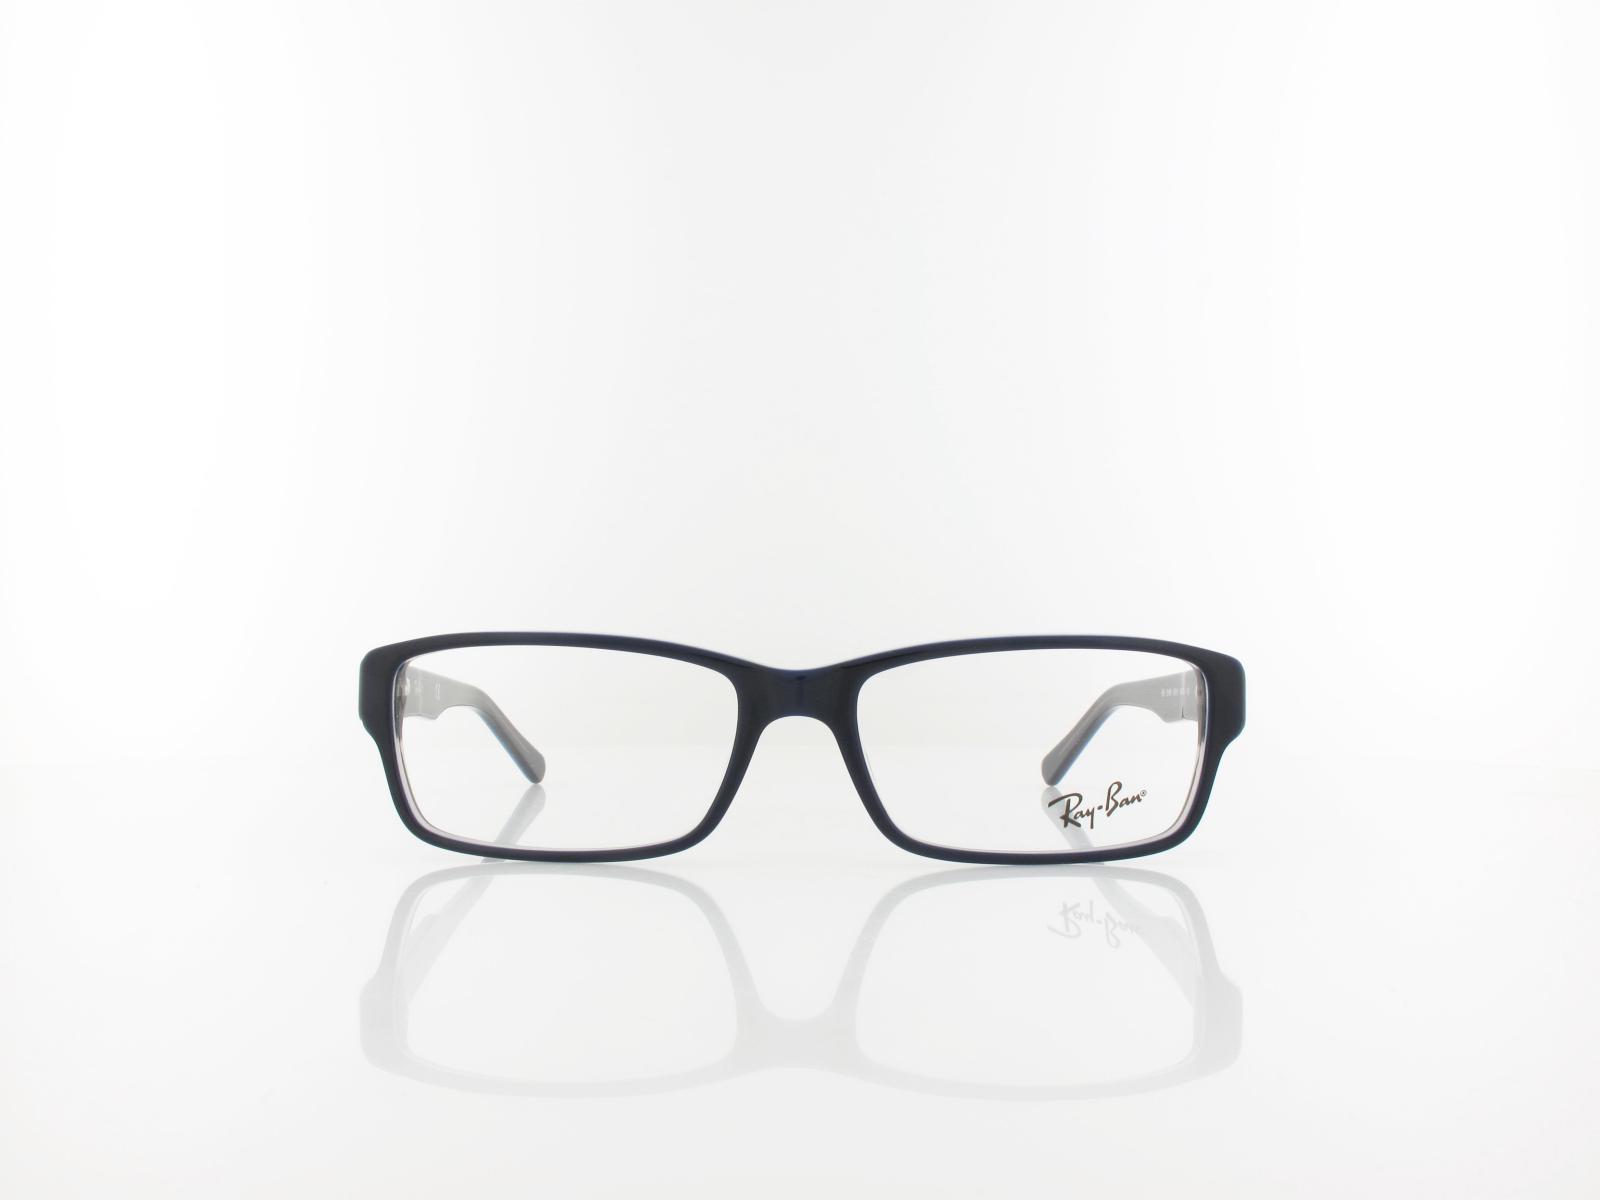 Ray Ban | RX5169 5815 54 | transparent grey on top blue